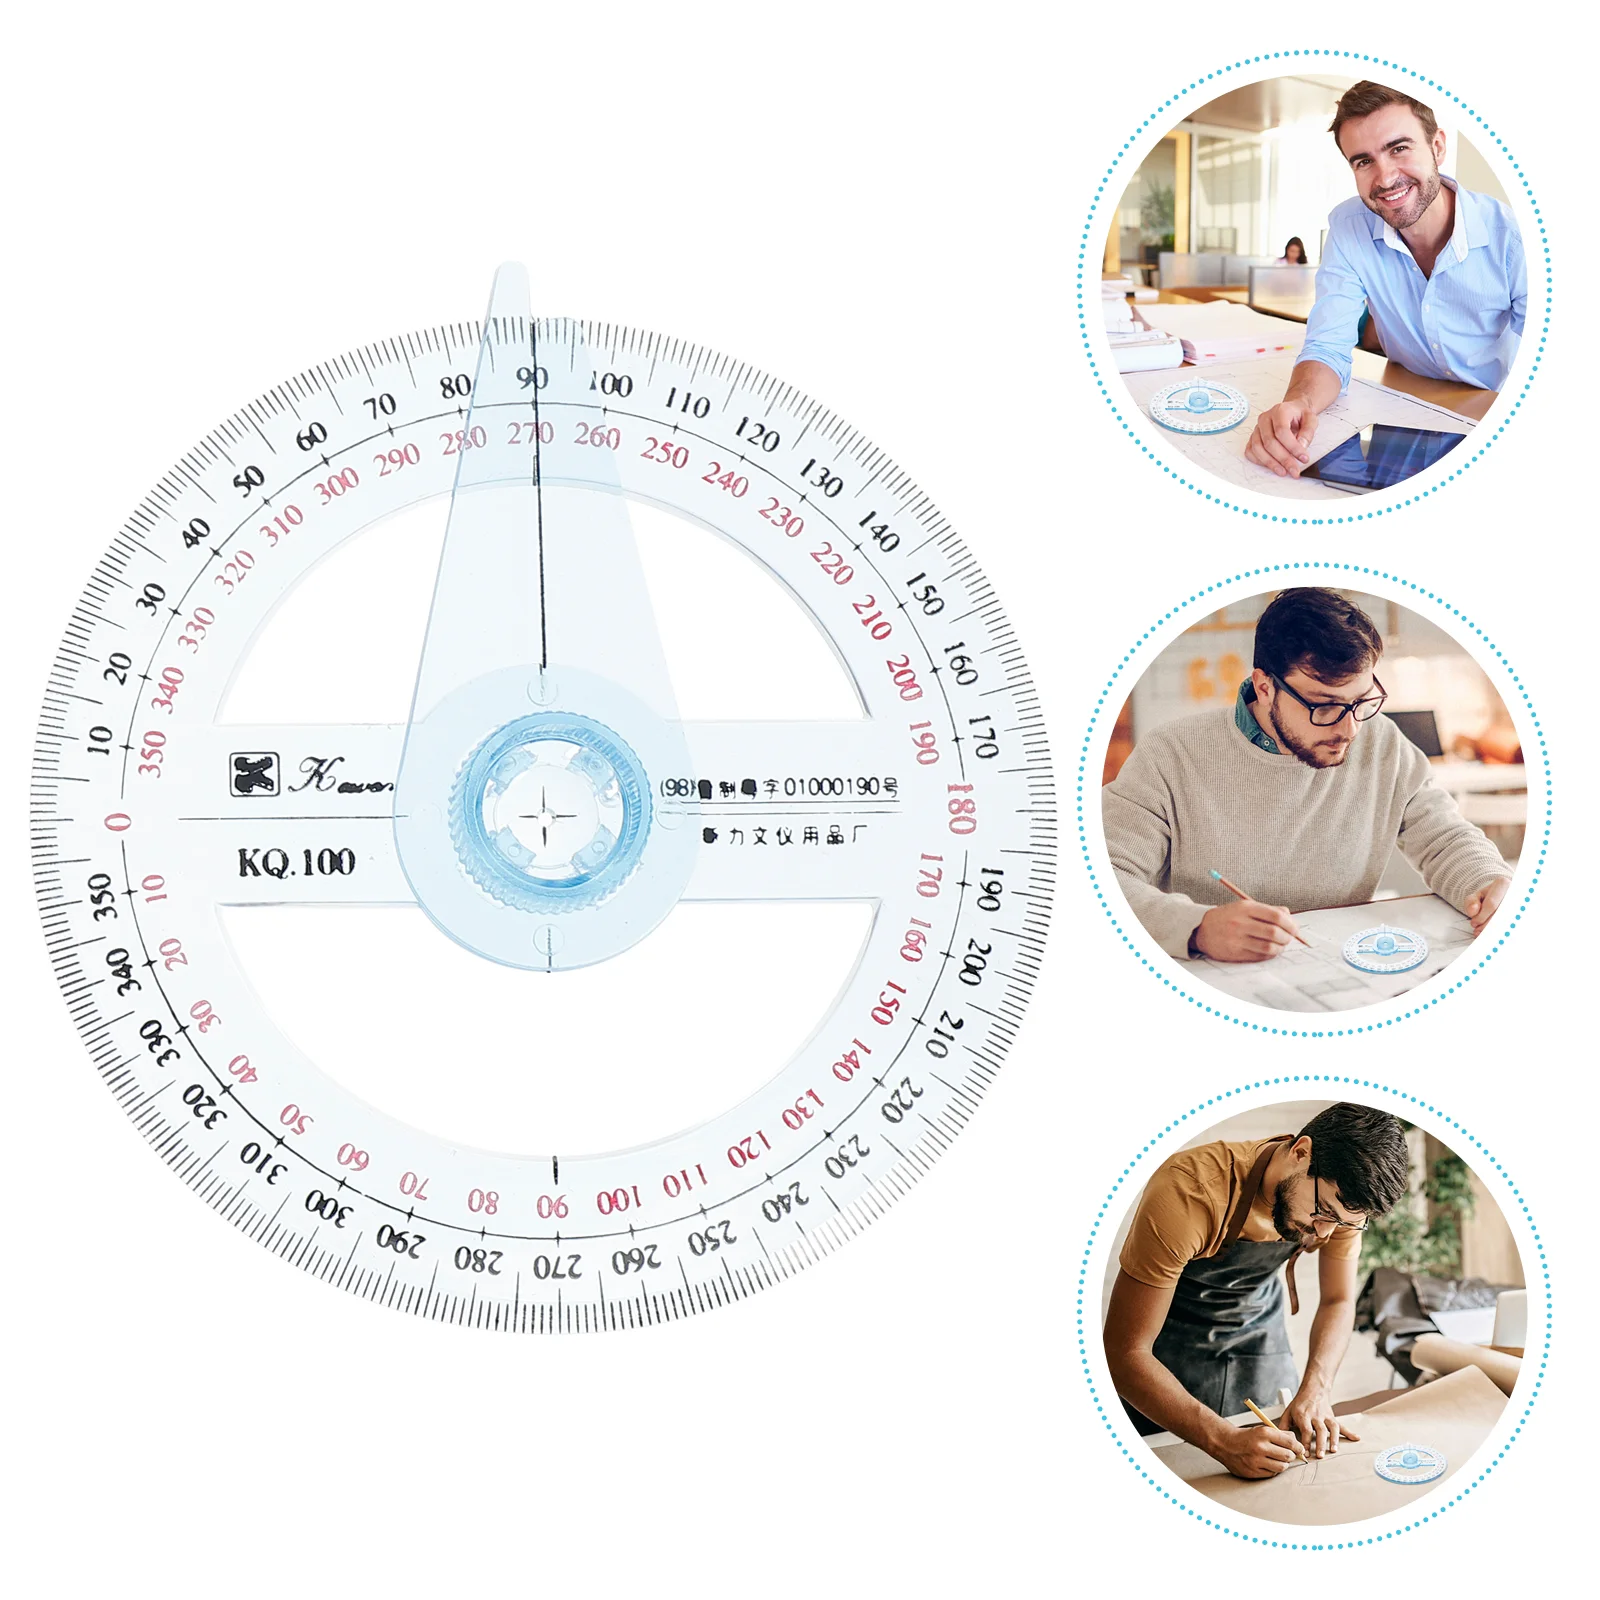 2pcs Circle Protractor 360 Degree Protractor Ruler Math Geometry Tools for School Classroom Office Drafting Measuring Supplies 360 degrees protractor with swing arm full circle pointer angle ruler math geometry drafting tools for students design линейка